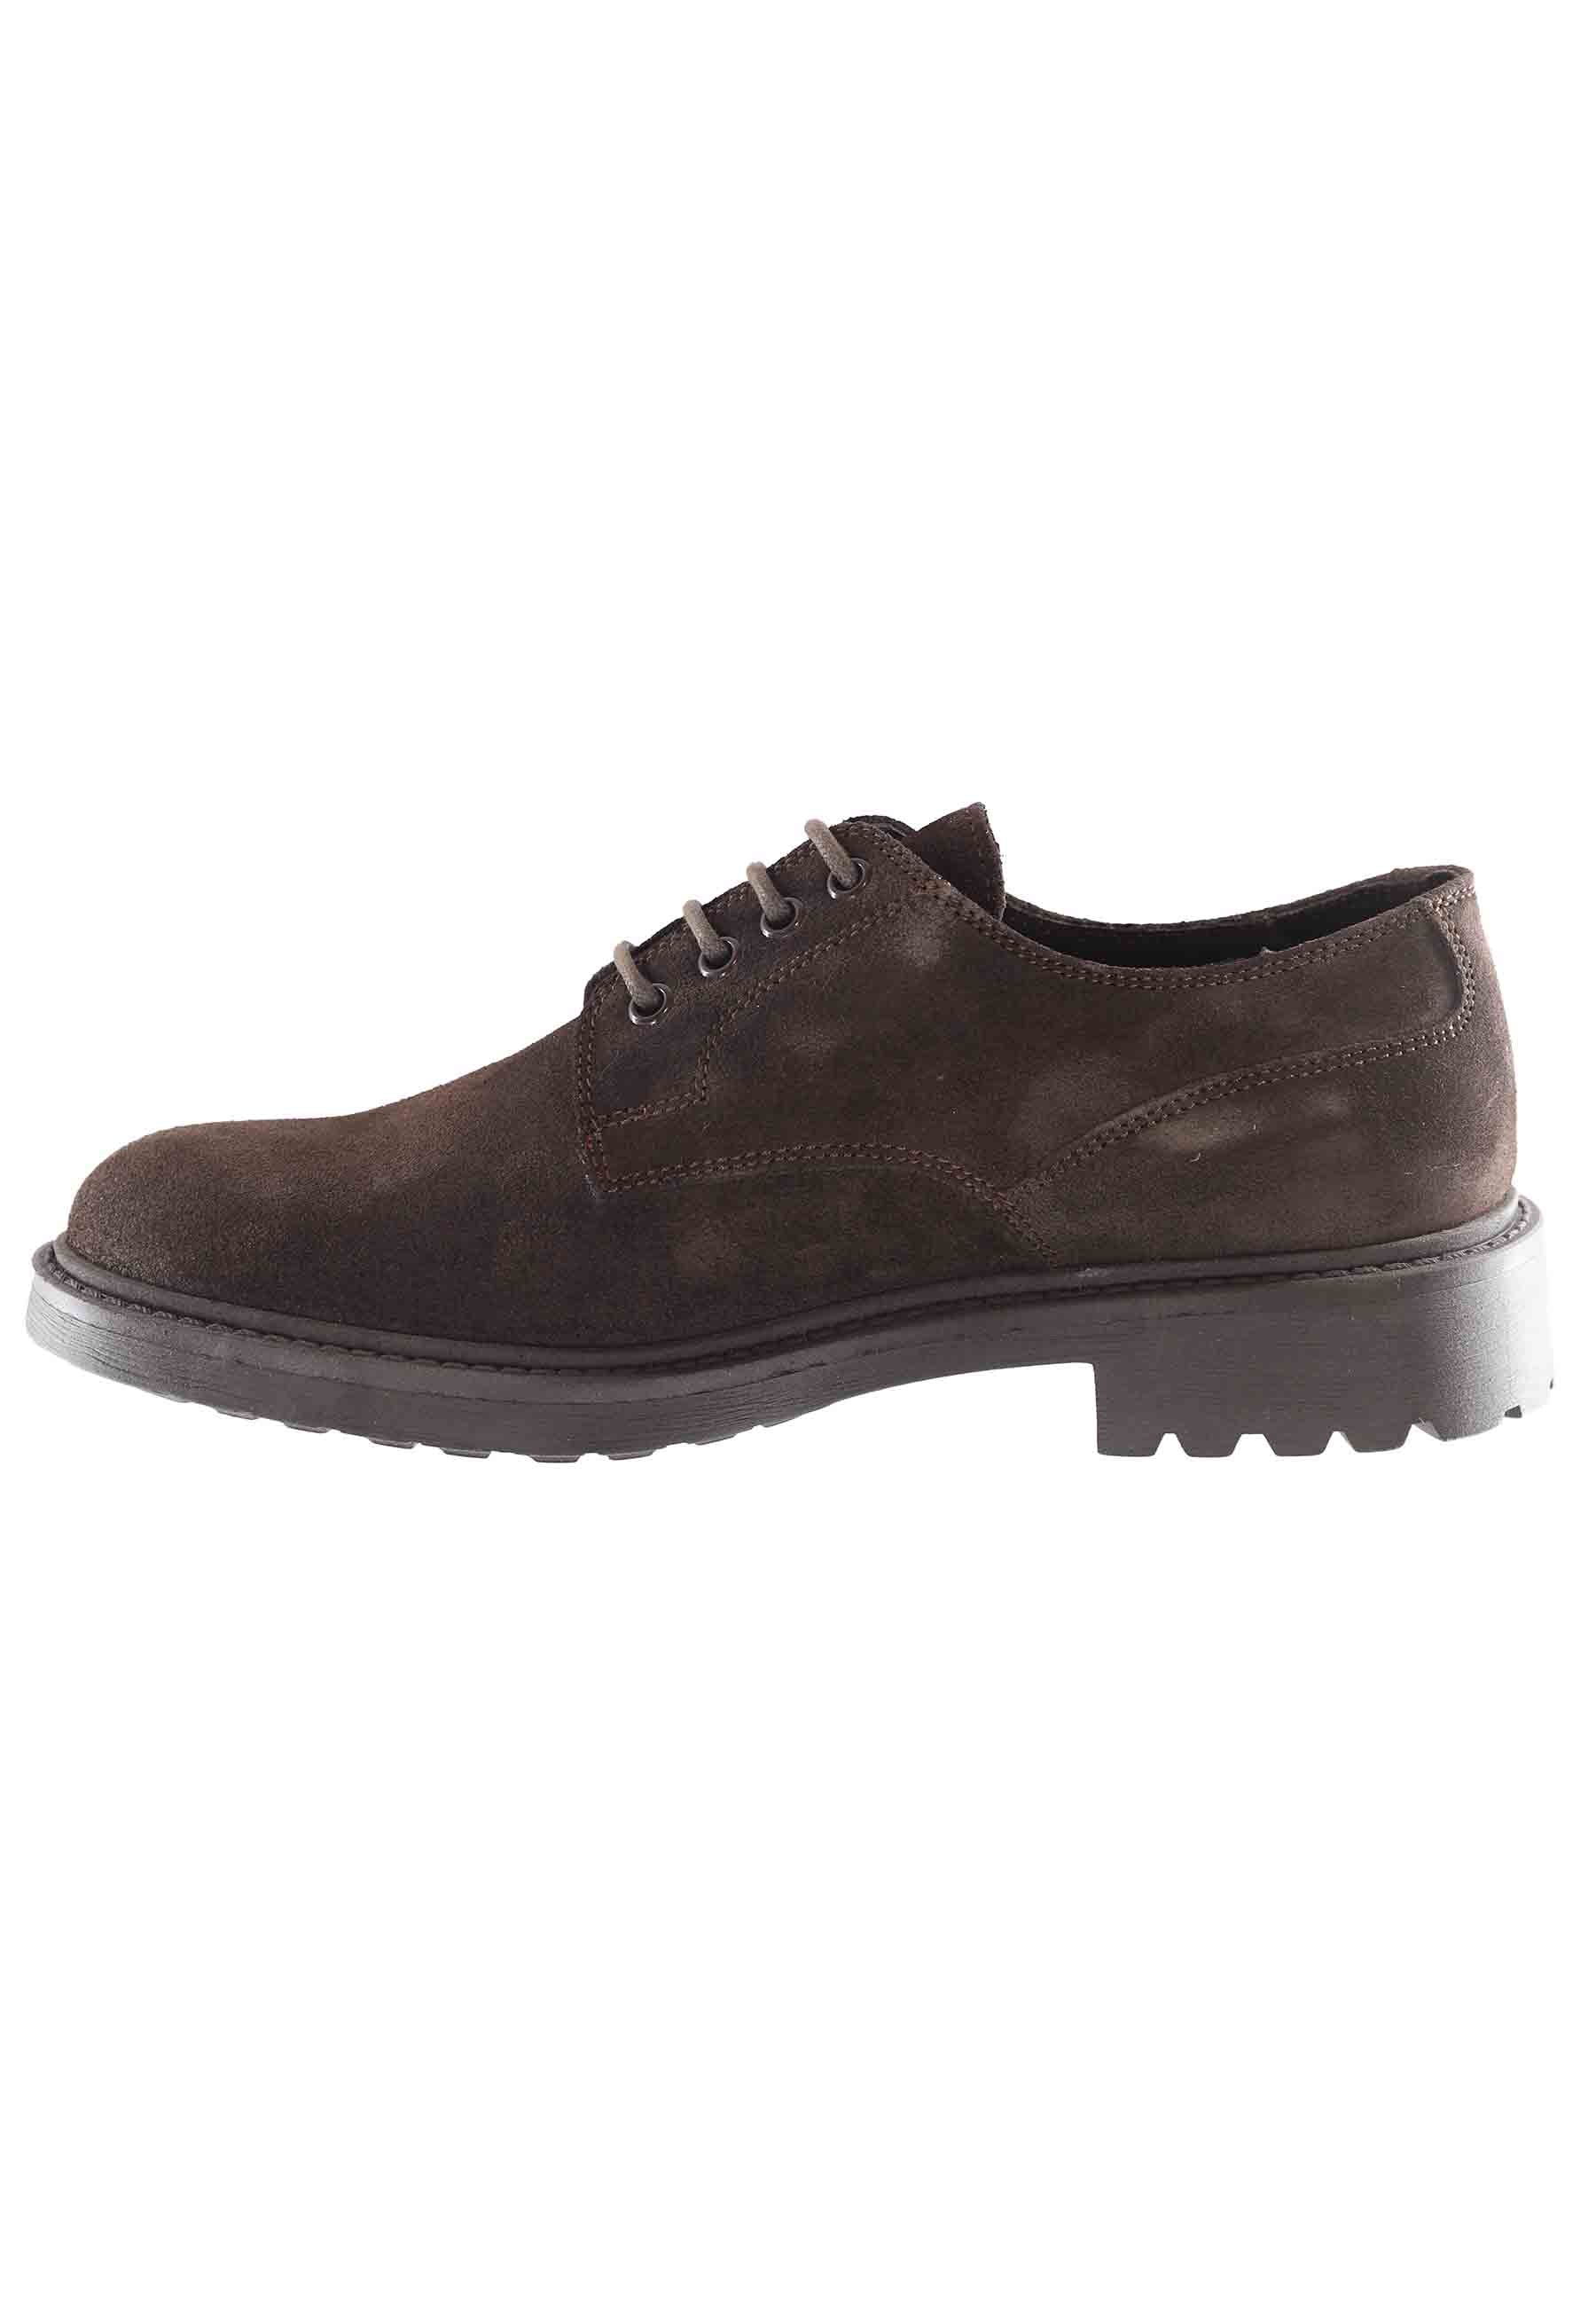 Men's lace-ups in dark brown greased suede with rubber sole